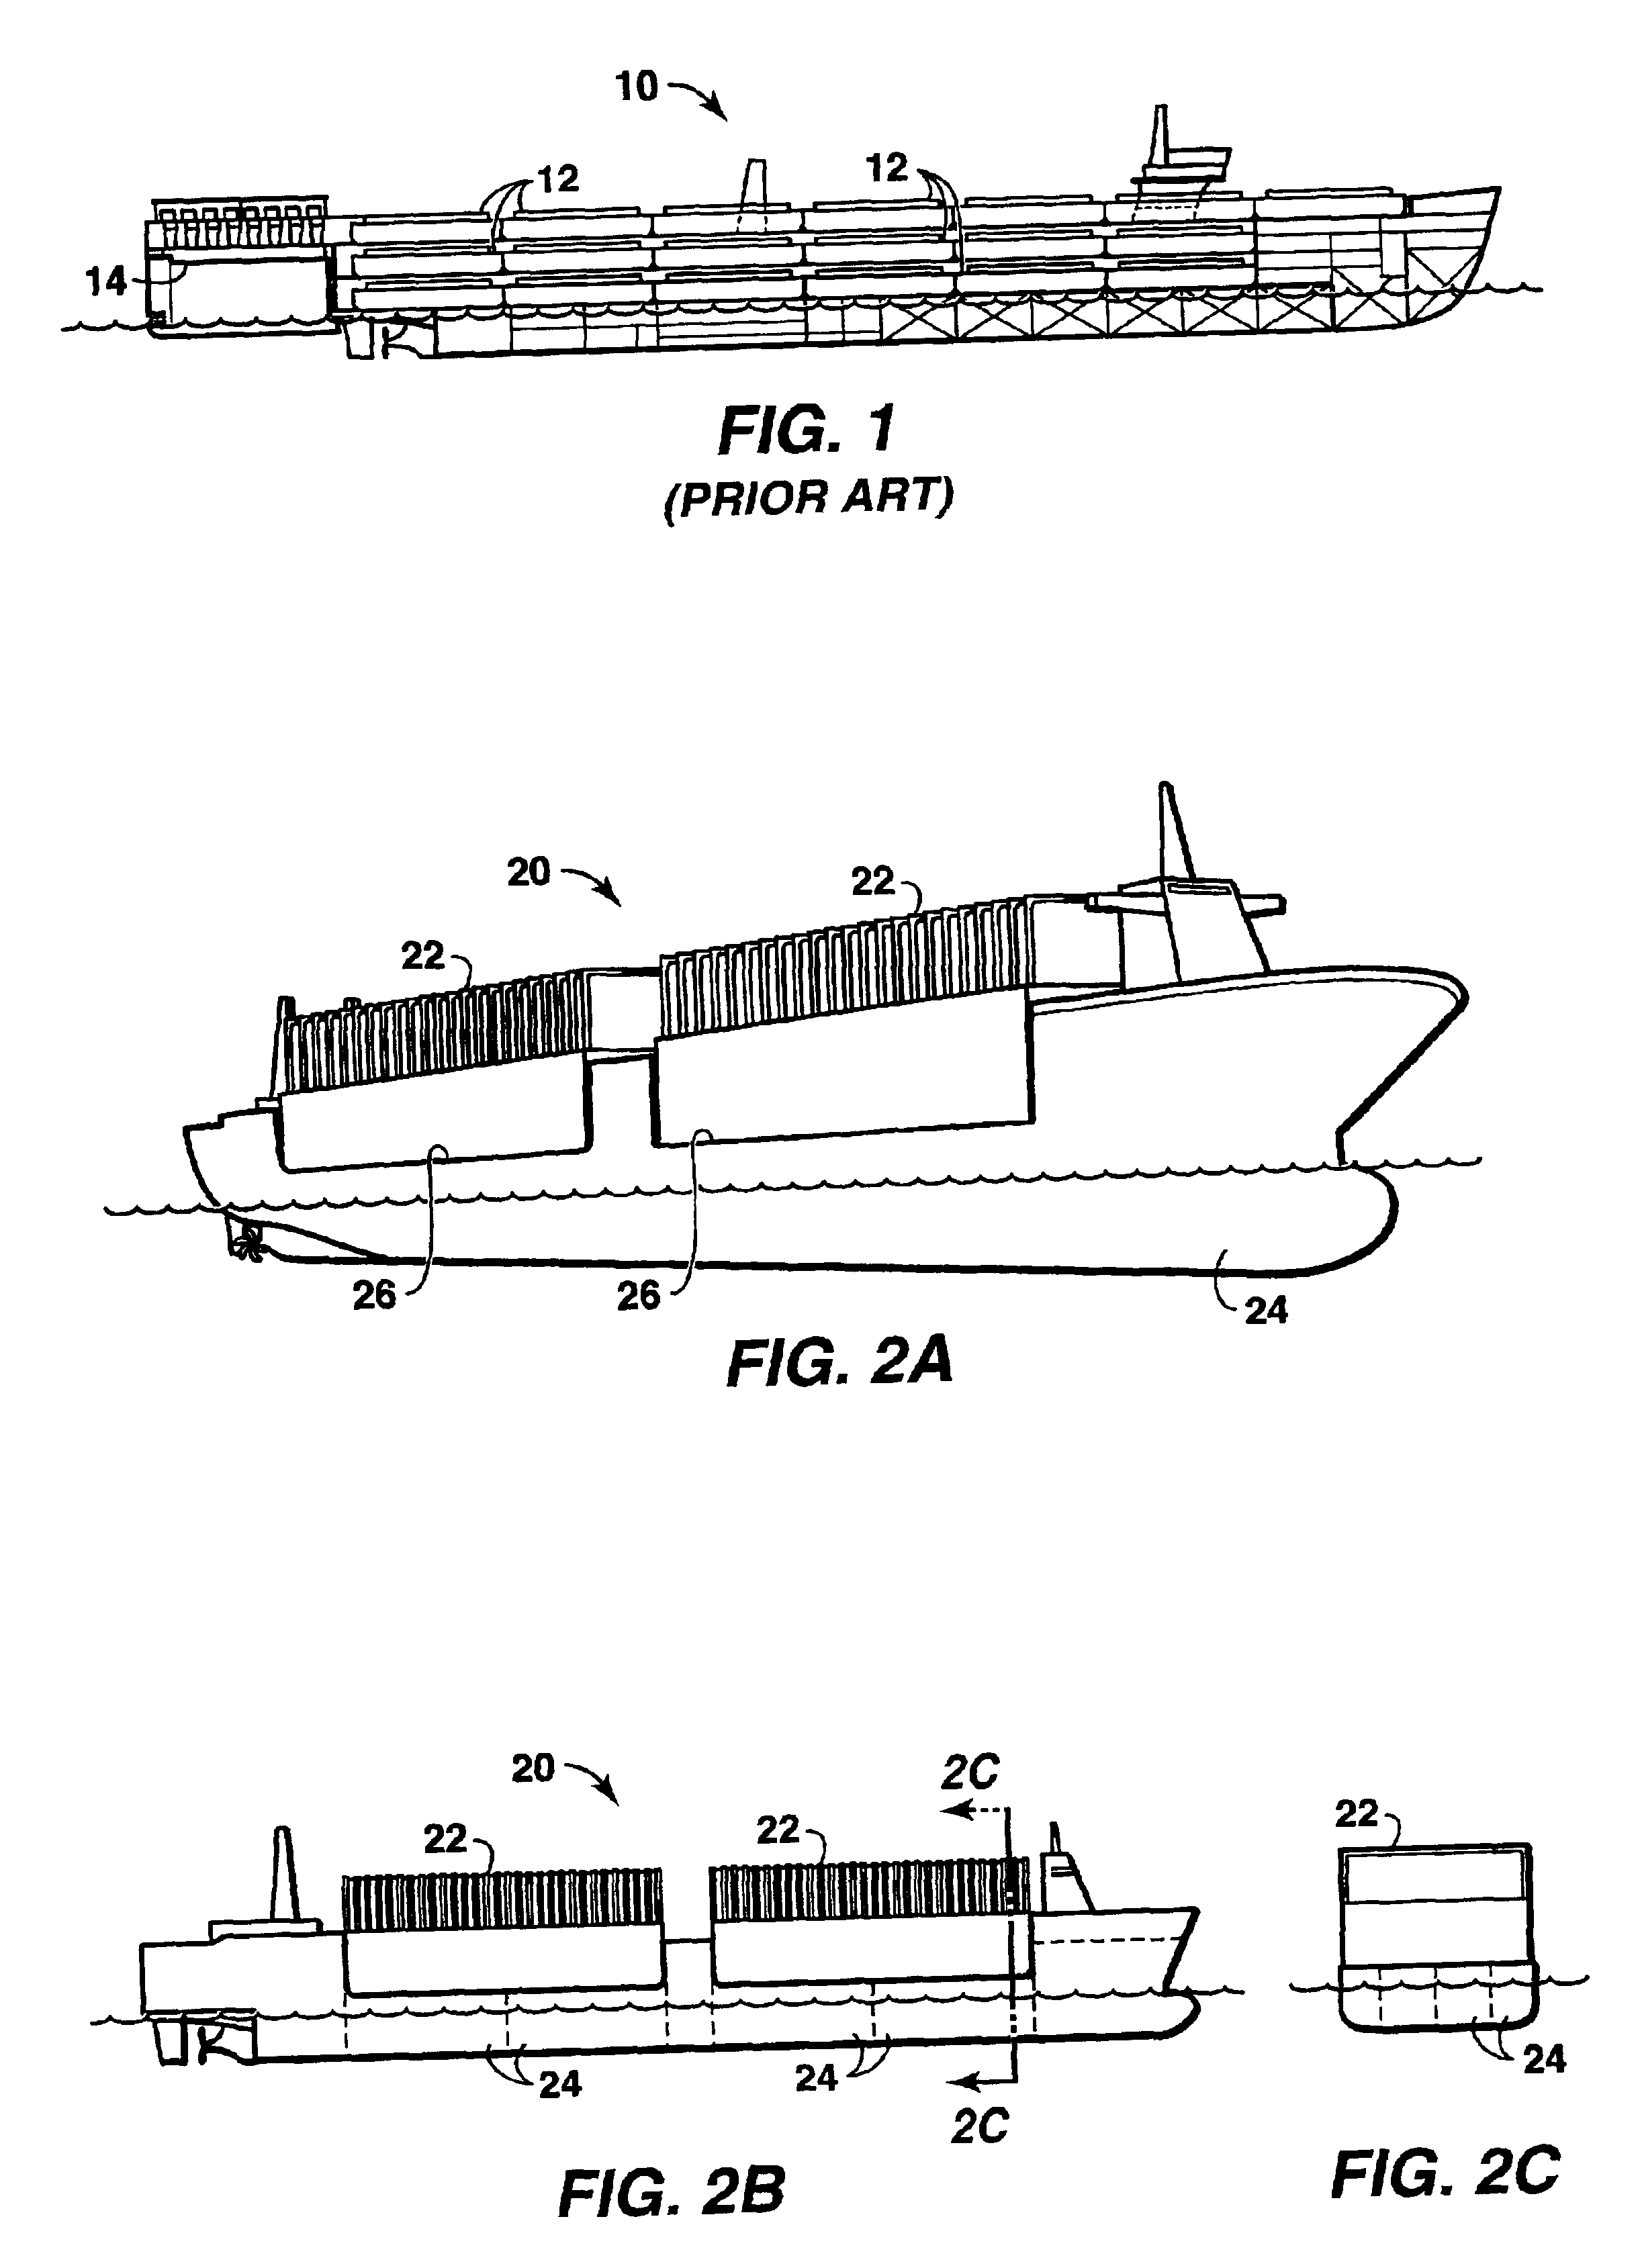 Systems and methods for transporting fluids in containers